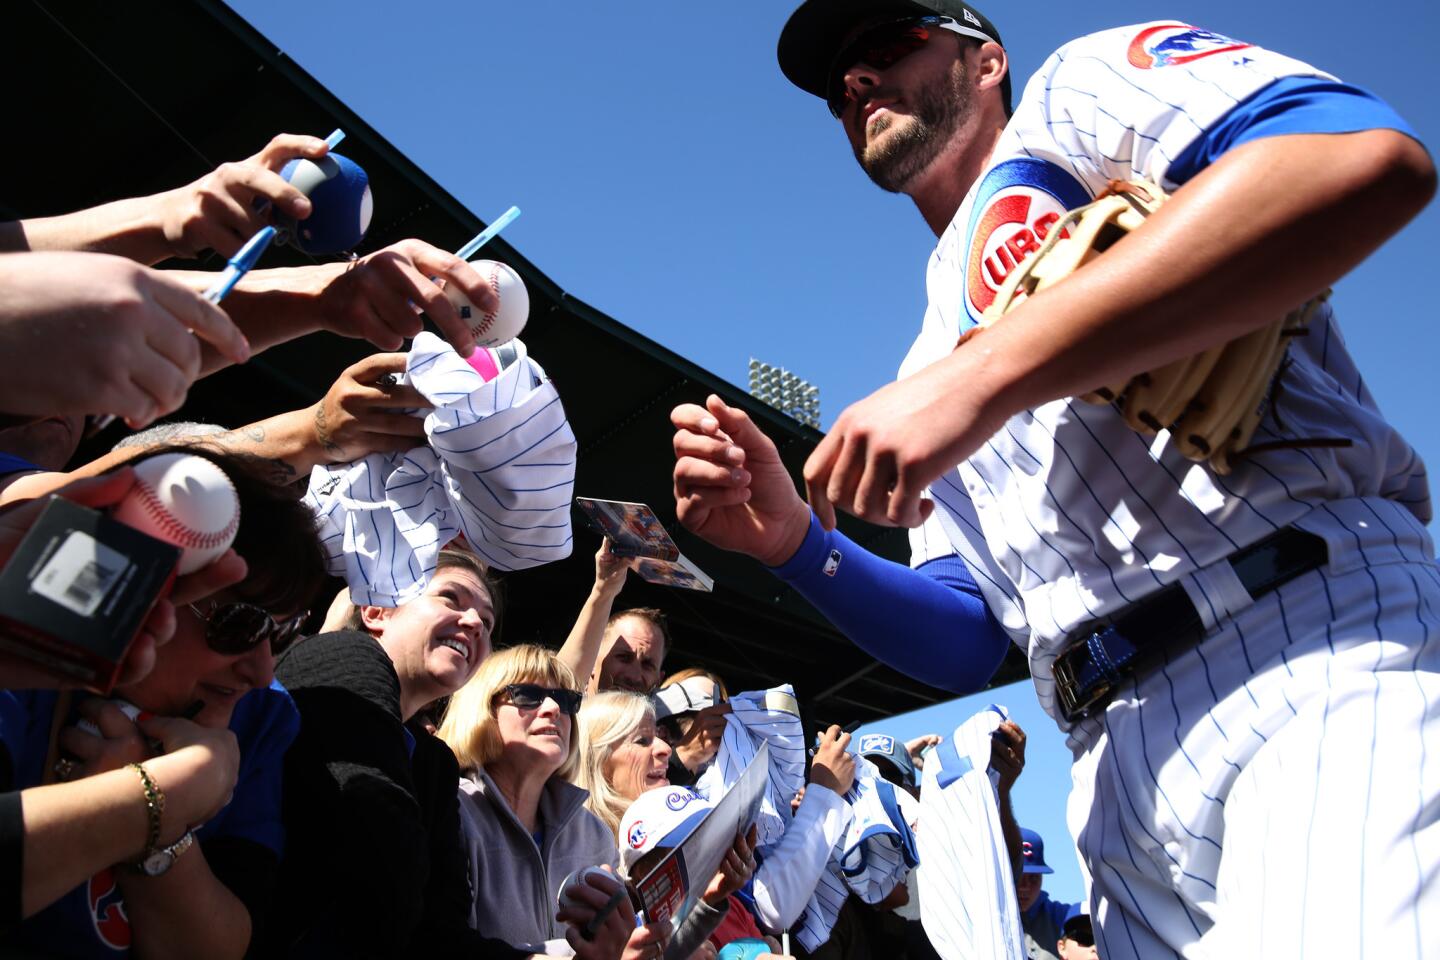 Kris Bryant signs autographs before a Cactus League game on Saturday, Feb. 24, 2018.